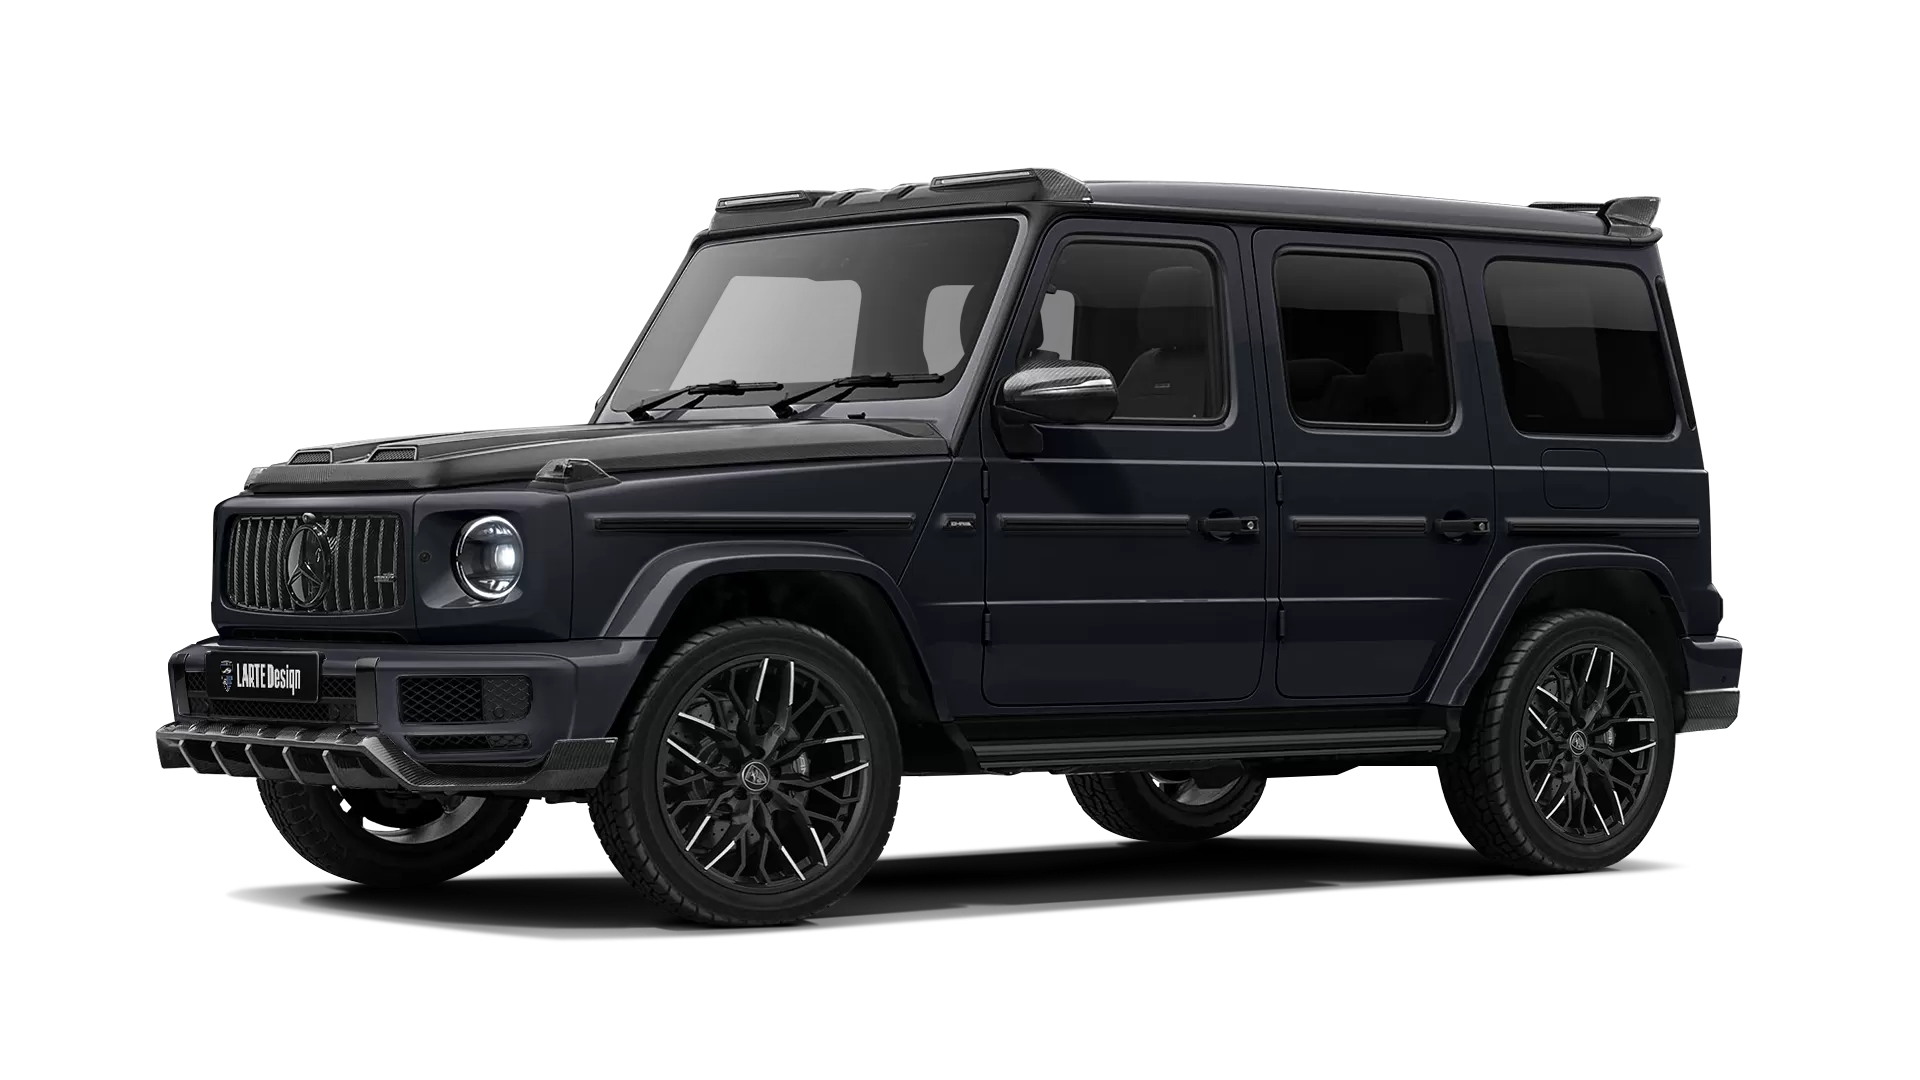 Mercedes G class W463 with carbon body kit: front view shown in Obsidian Black